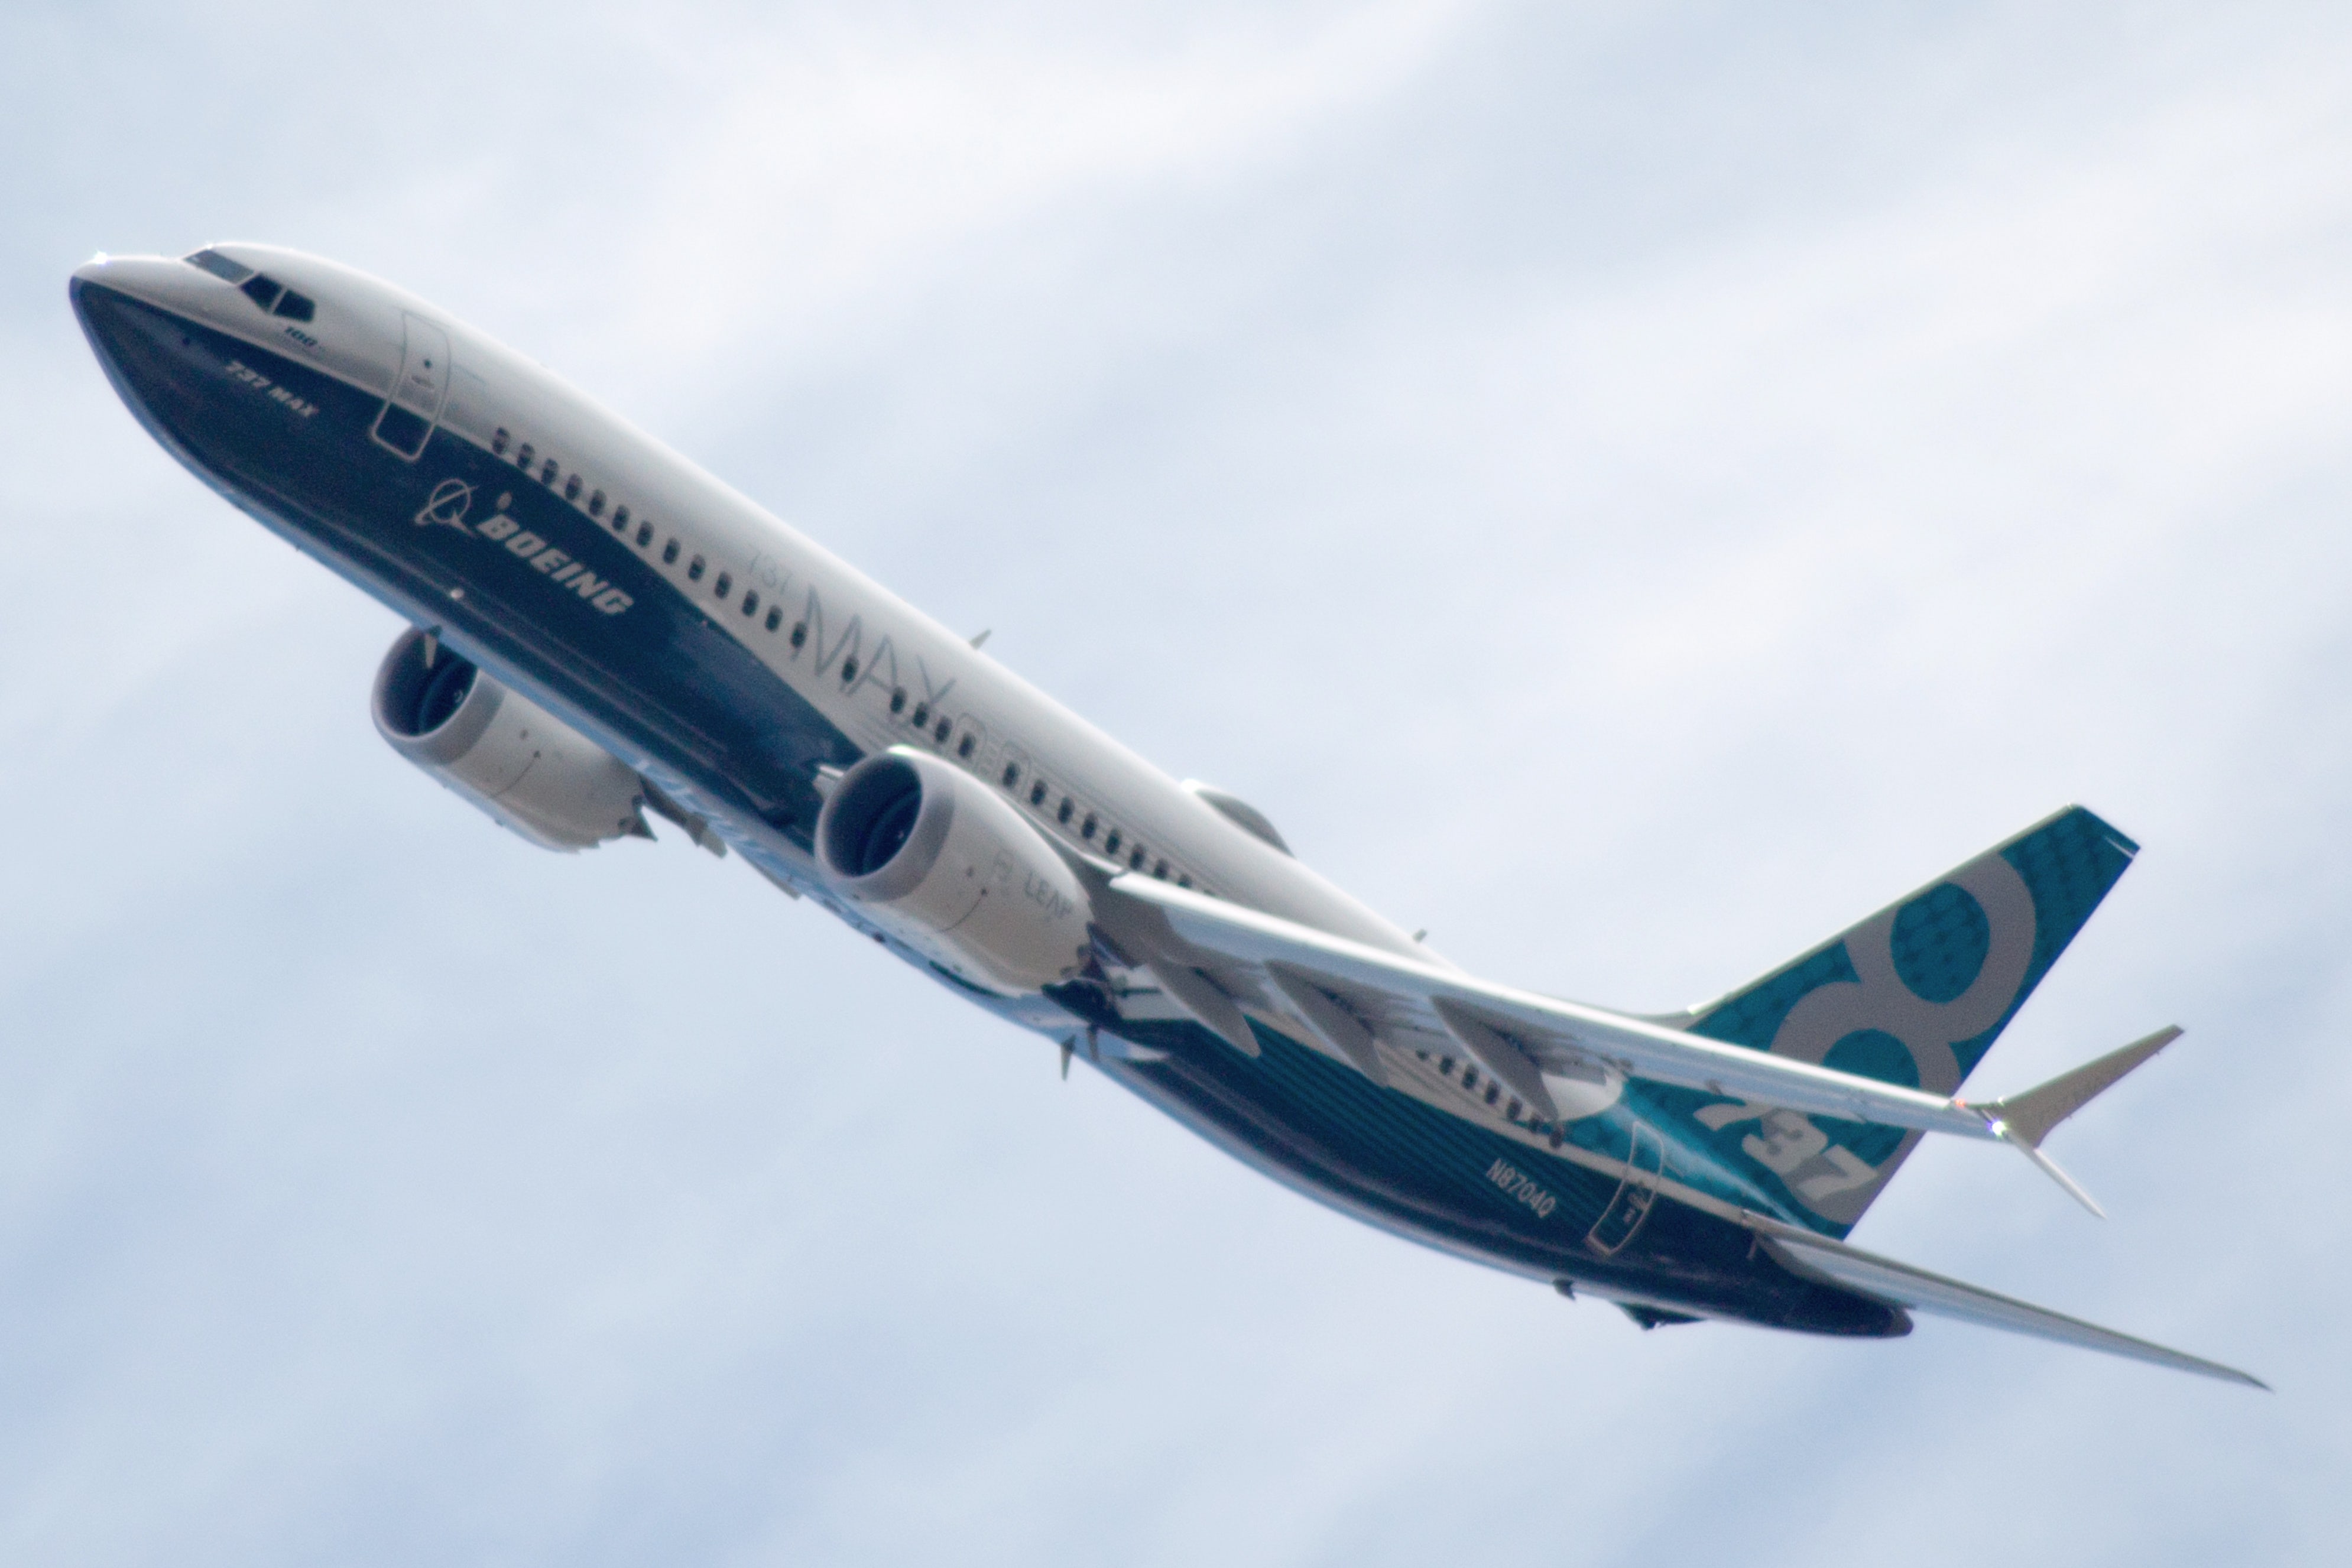 US Government Watchdog To Review FAA's Oversight Of Two Safety Features On Boeing 737 MAX